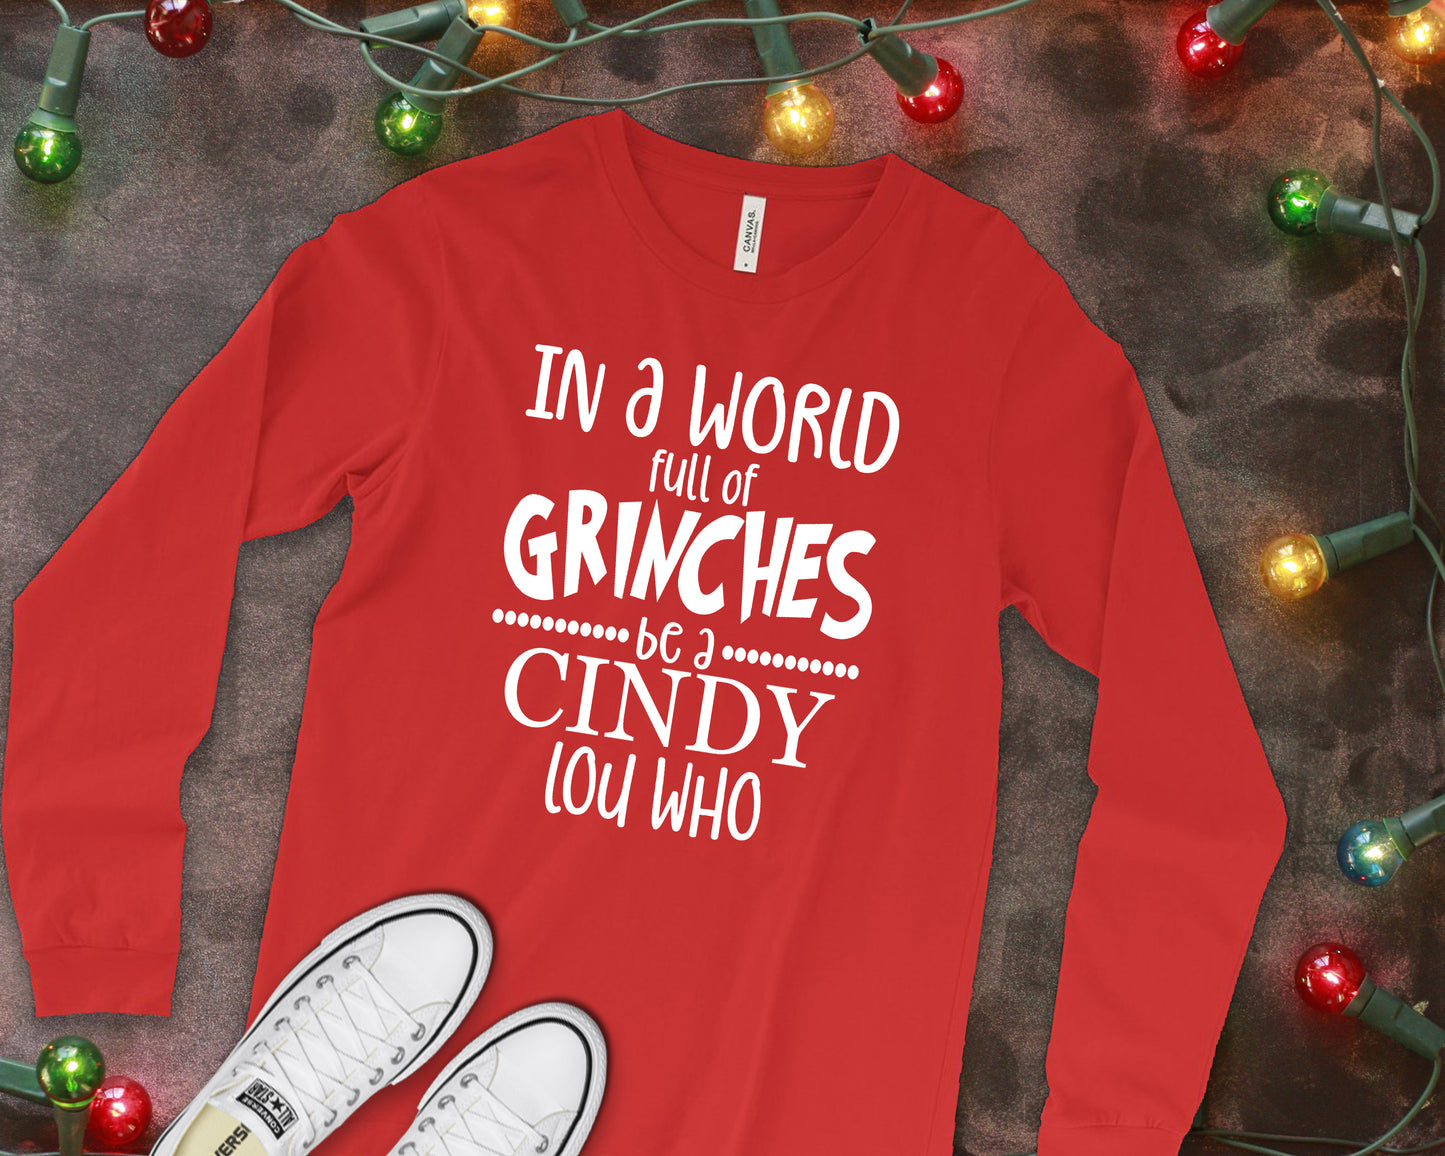 In a world full of Gr*nches be a Cindy Lou who